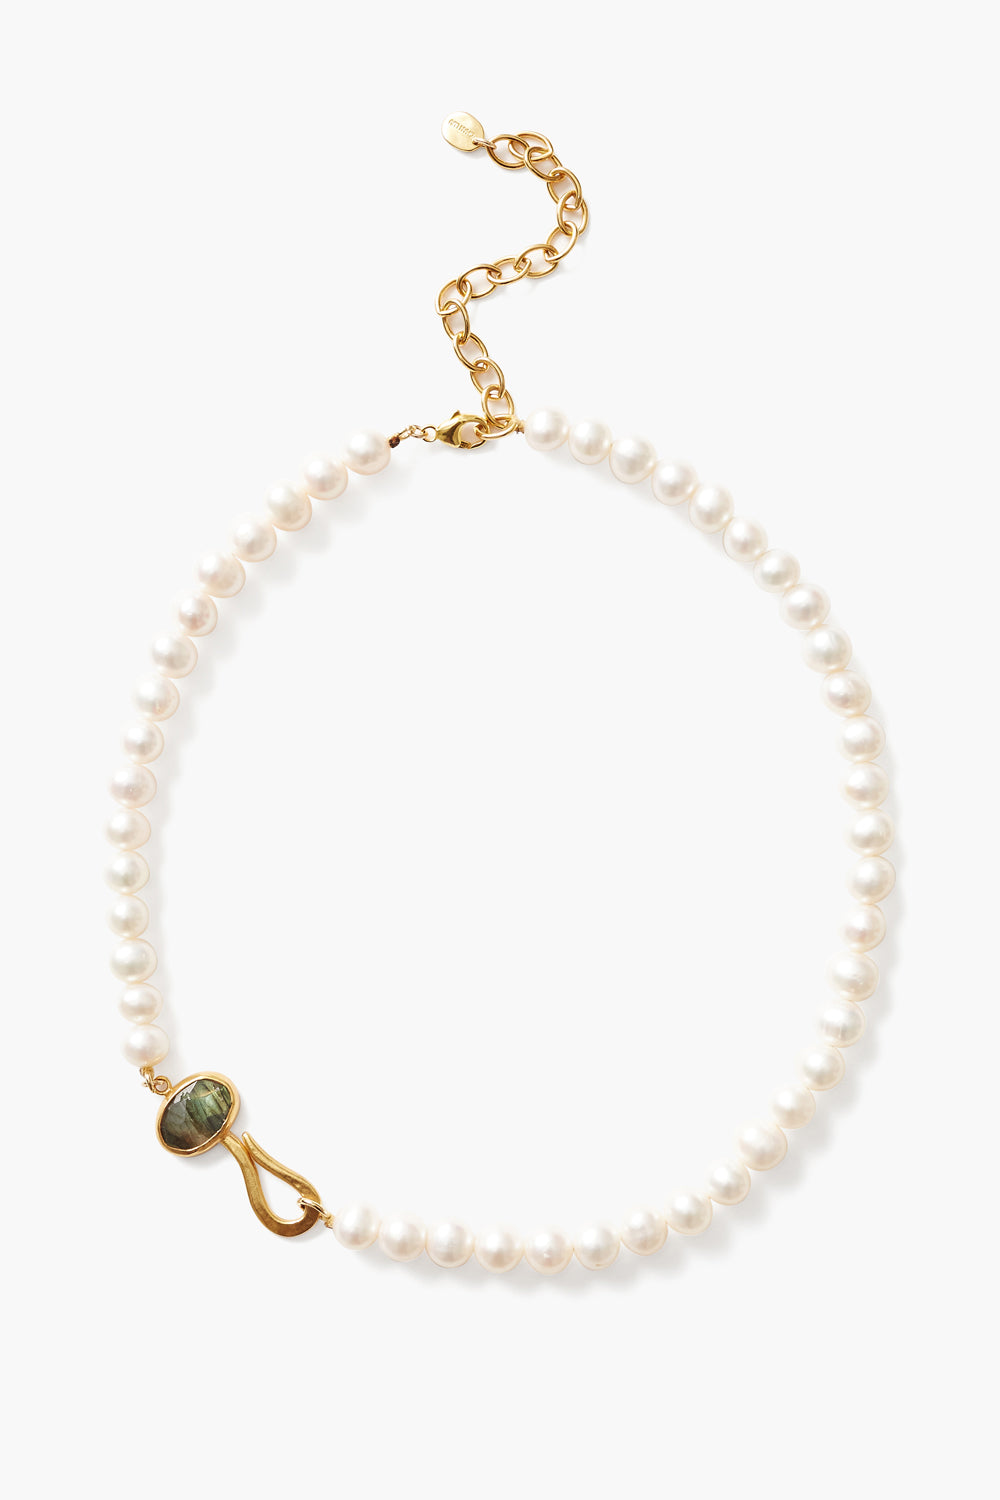 WHITE PEARL ADJUSTABLE BEZEL WRAPPED HOOK NECKLACE - Kingfisher Road - Online Boutique